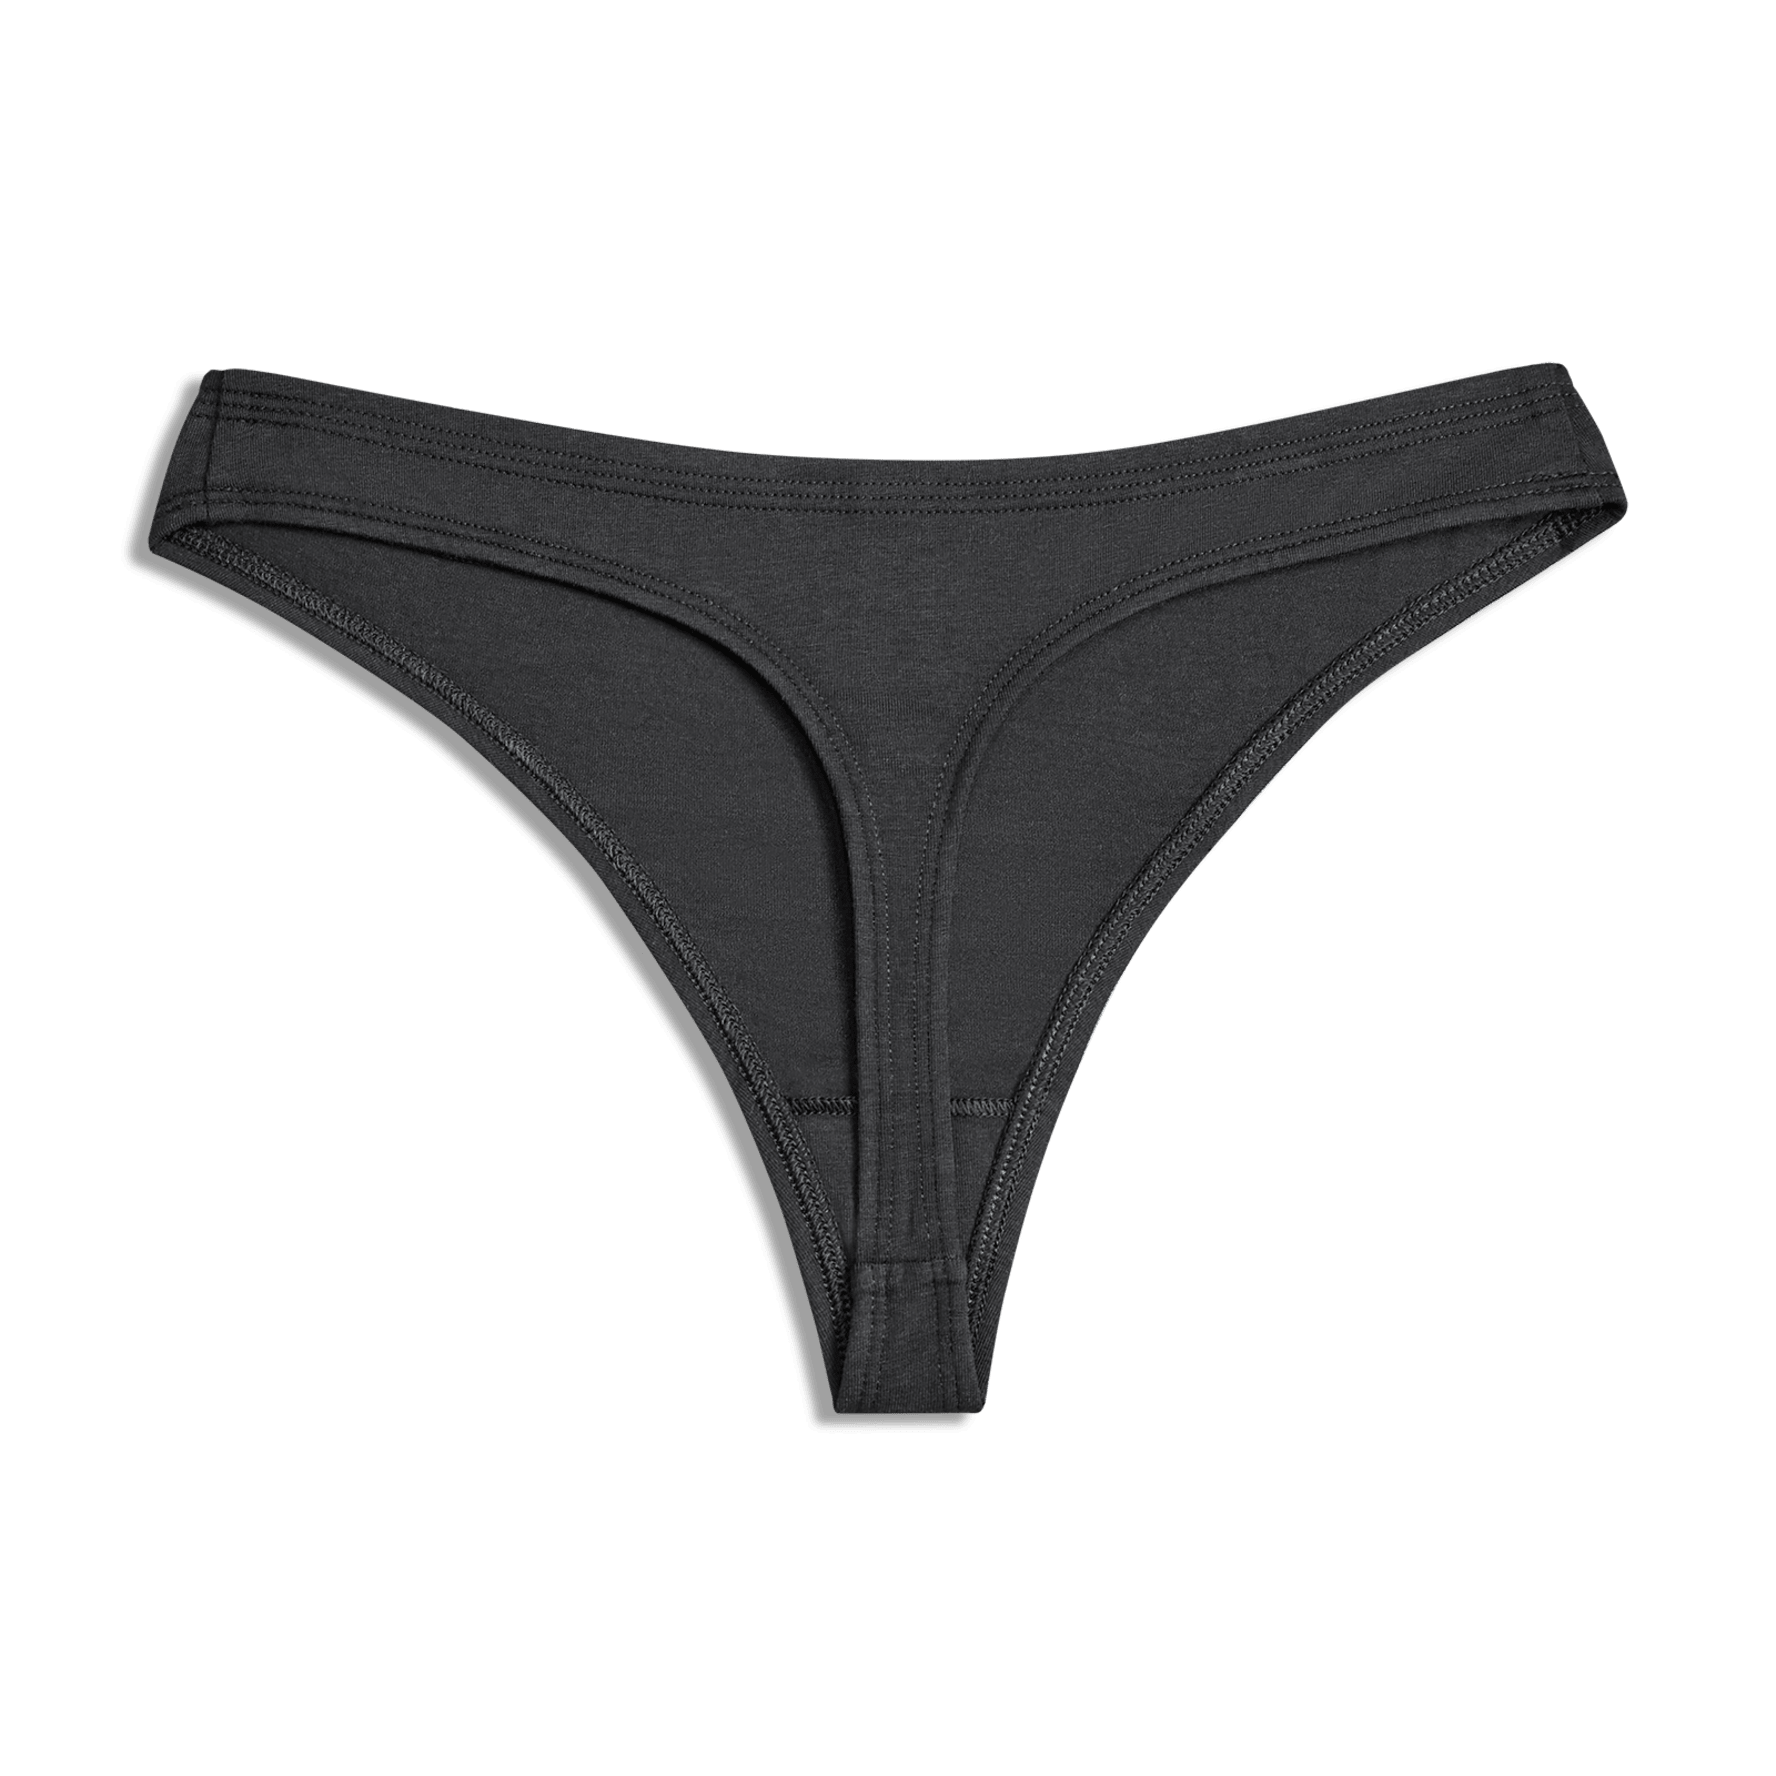 Wholesale used pantys for sale In Sexy And Comfortable Styles